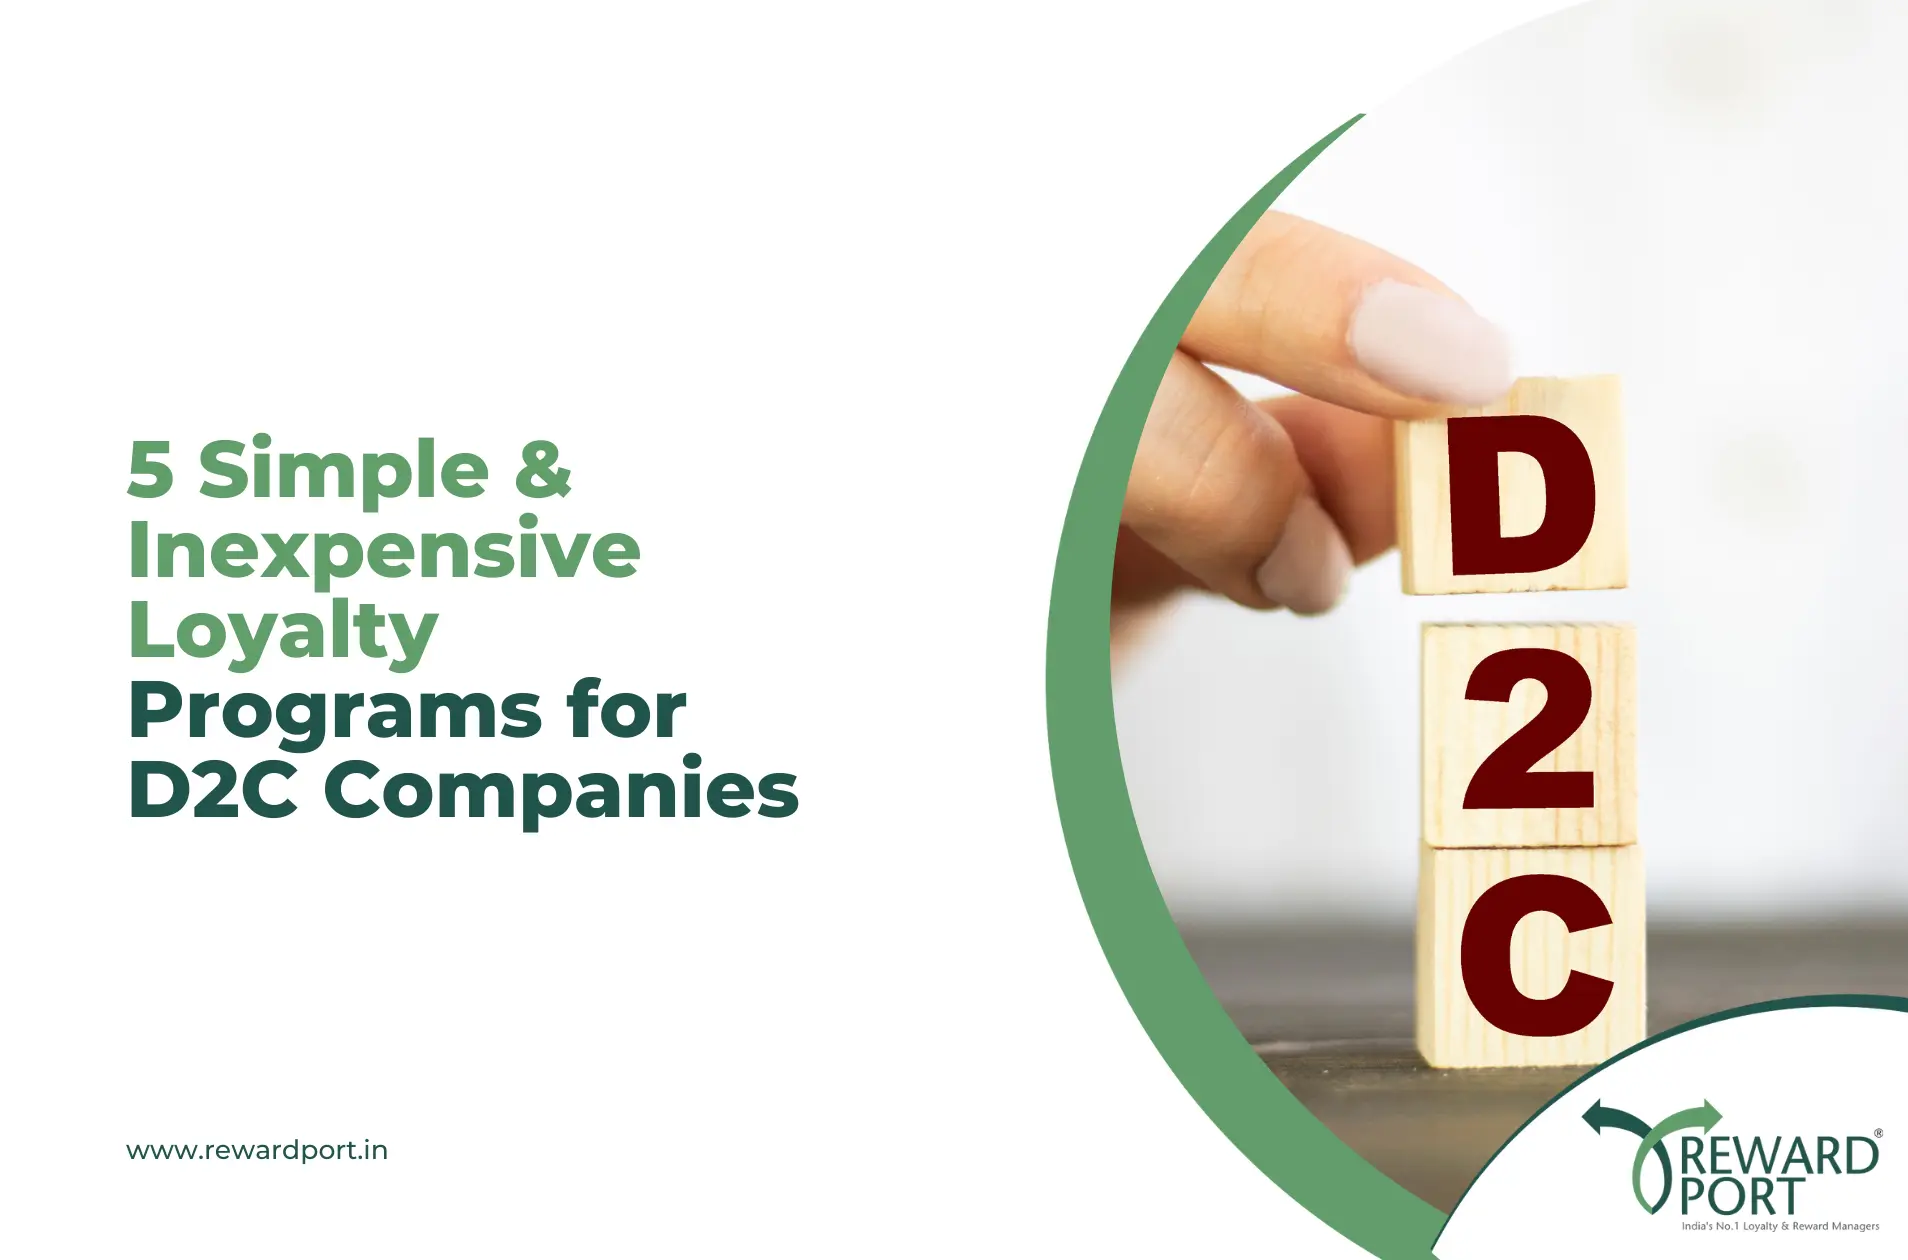 5 Simple and Inexpensive Loyalty Programs for D2C Companies